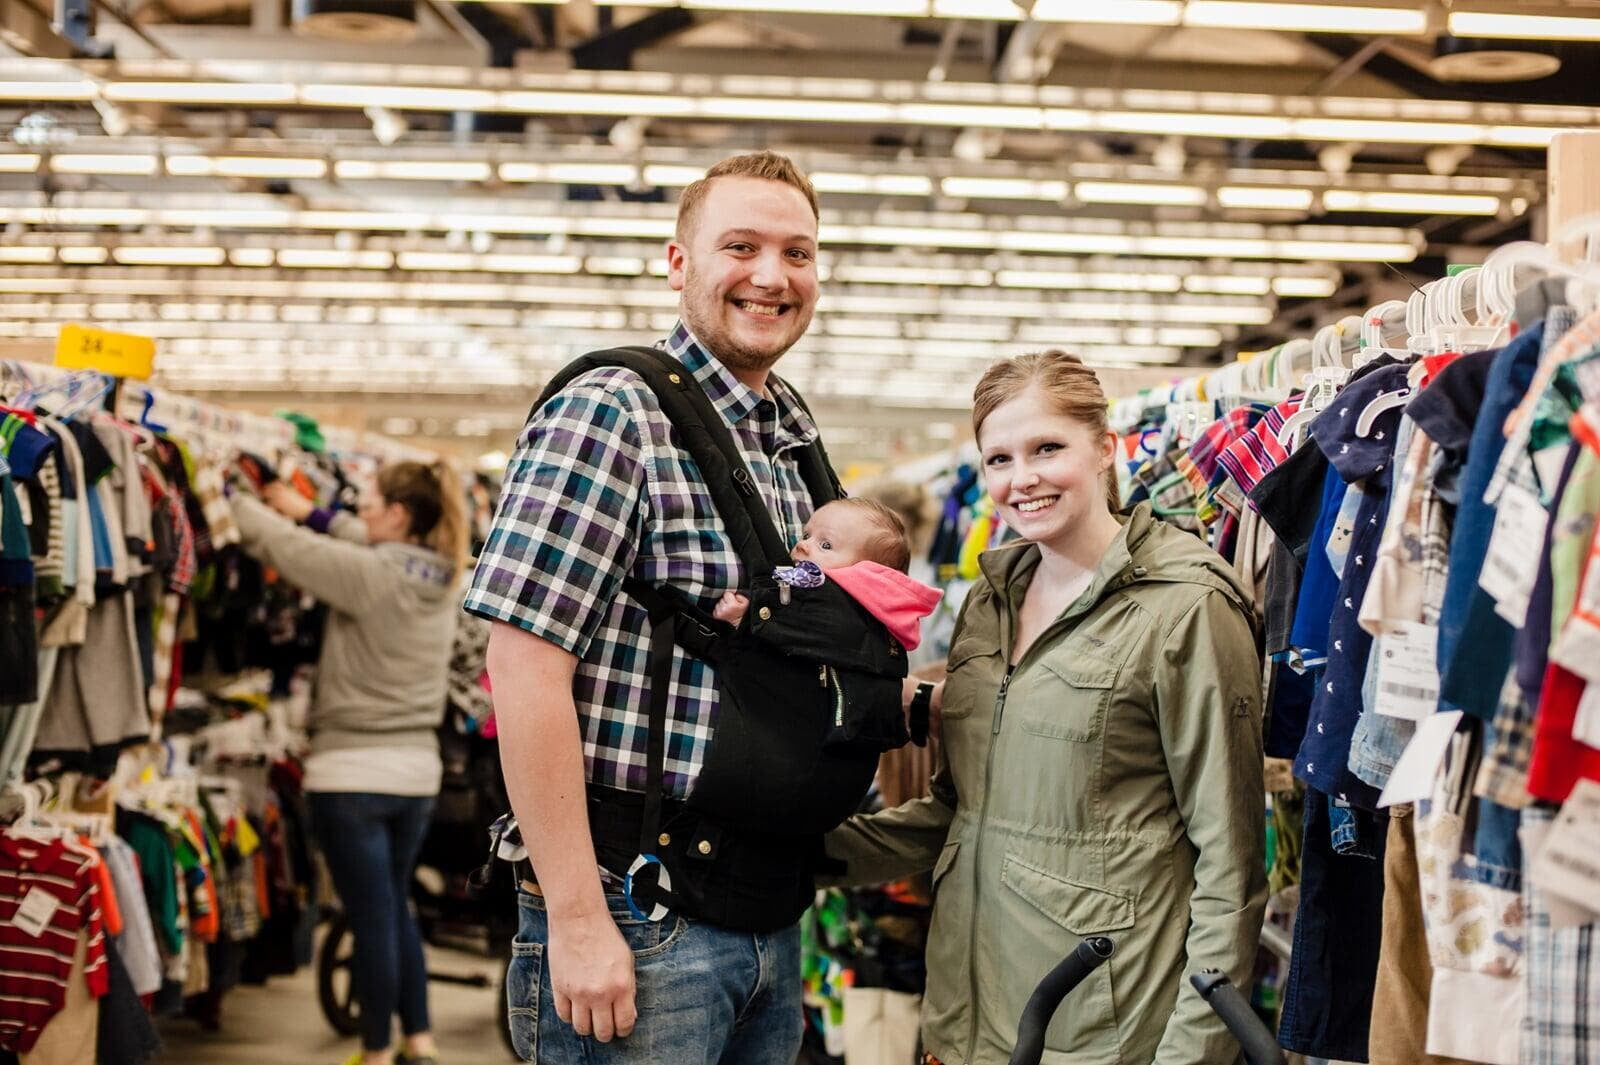 mother and father shopping in an aisle of clothes.  Father is baby wearing an infant